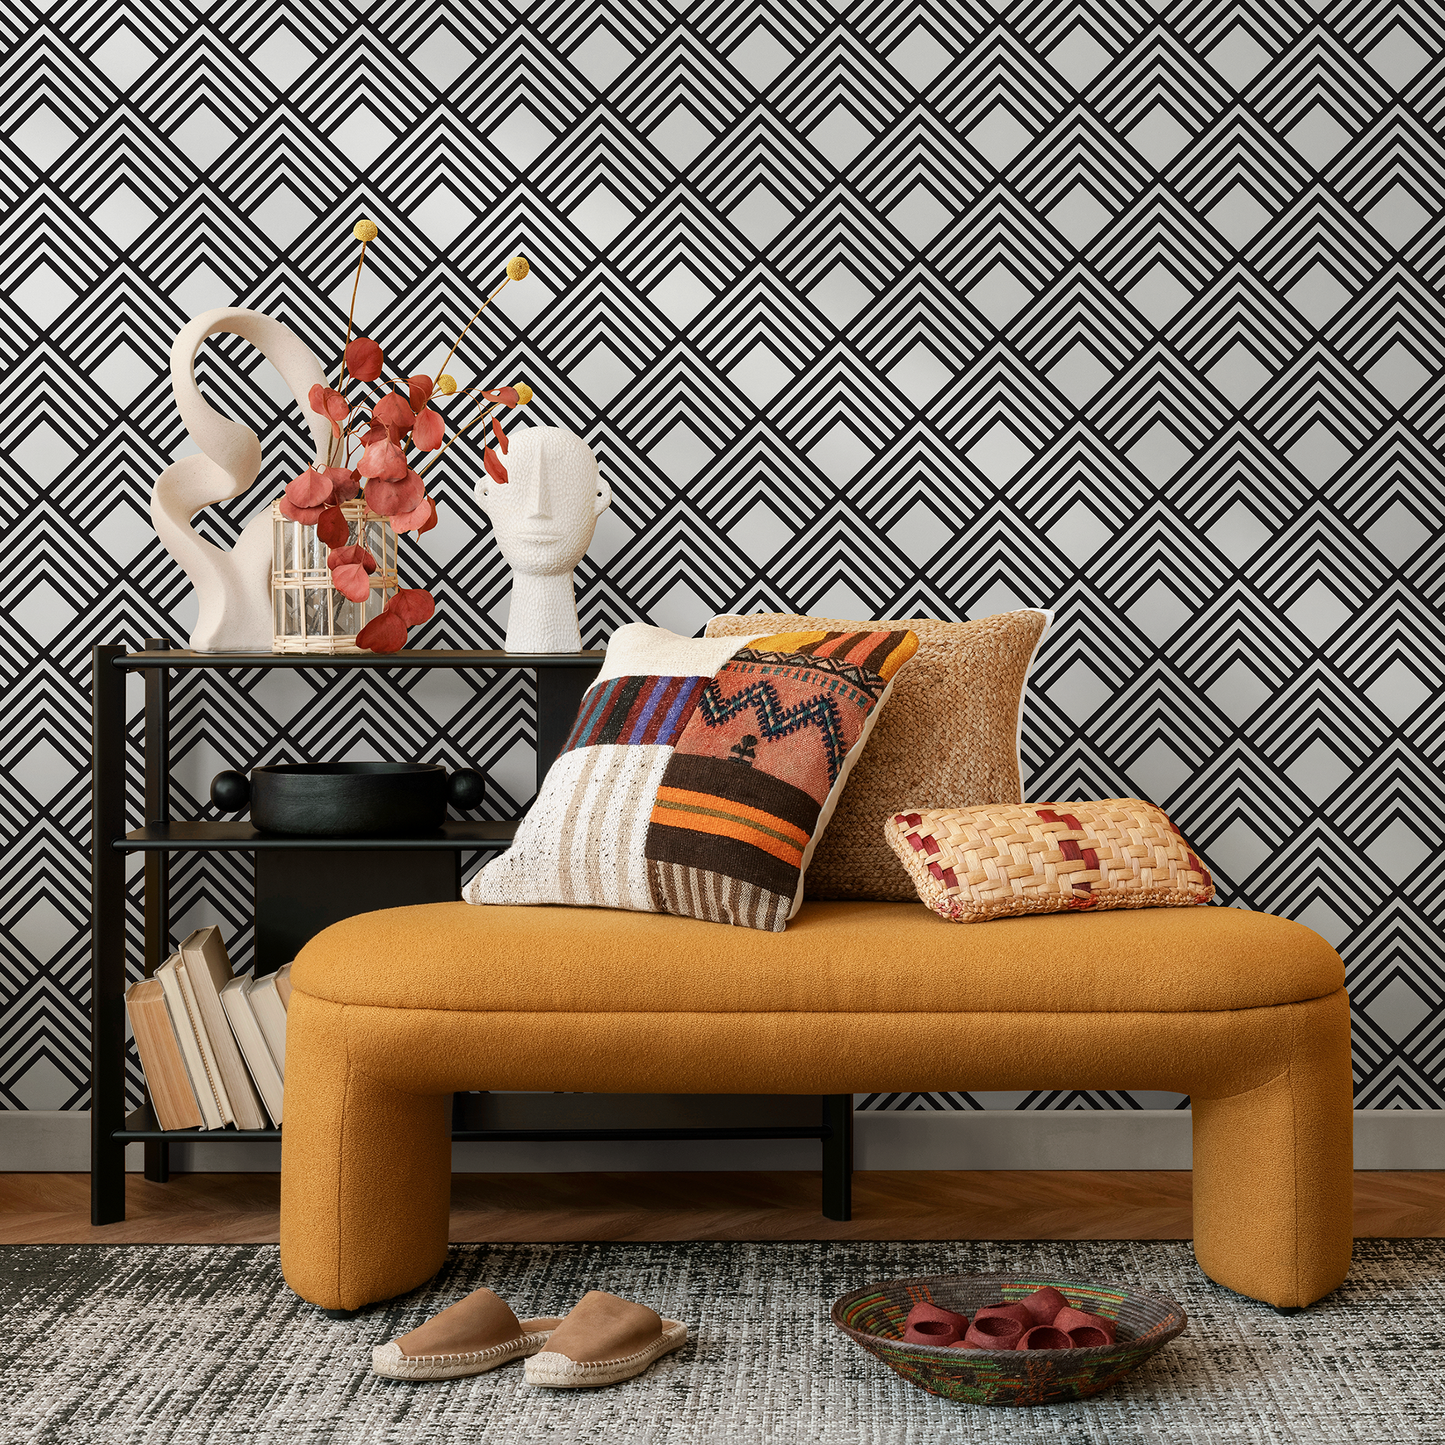 Removable Wallpaper Peel and Stick Wallpaper Wall Paper Wall Mural - Black and White Minimal Wallpaper - B084